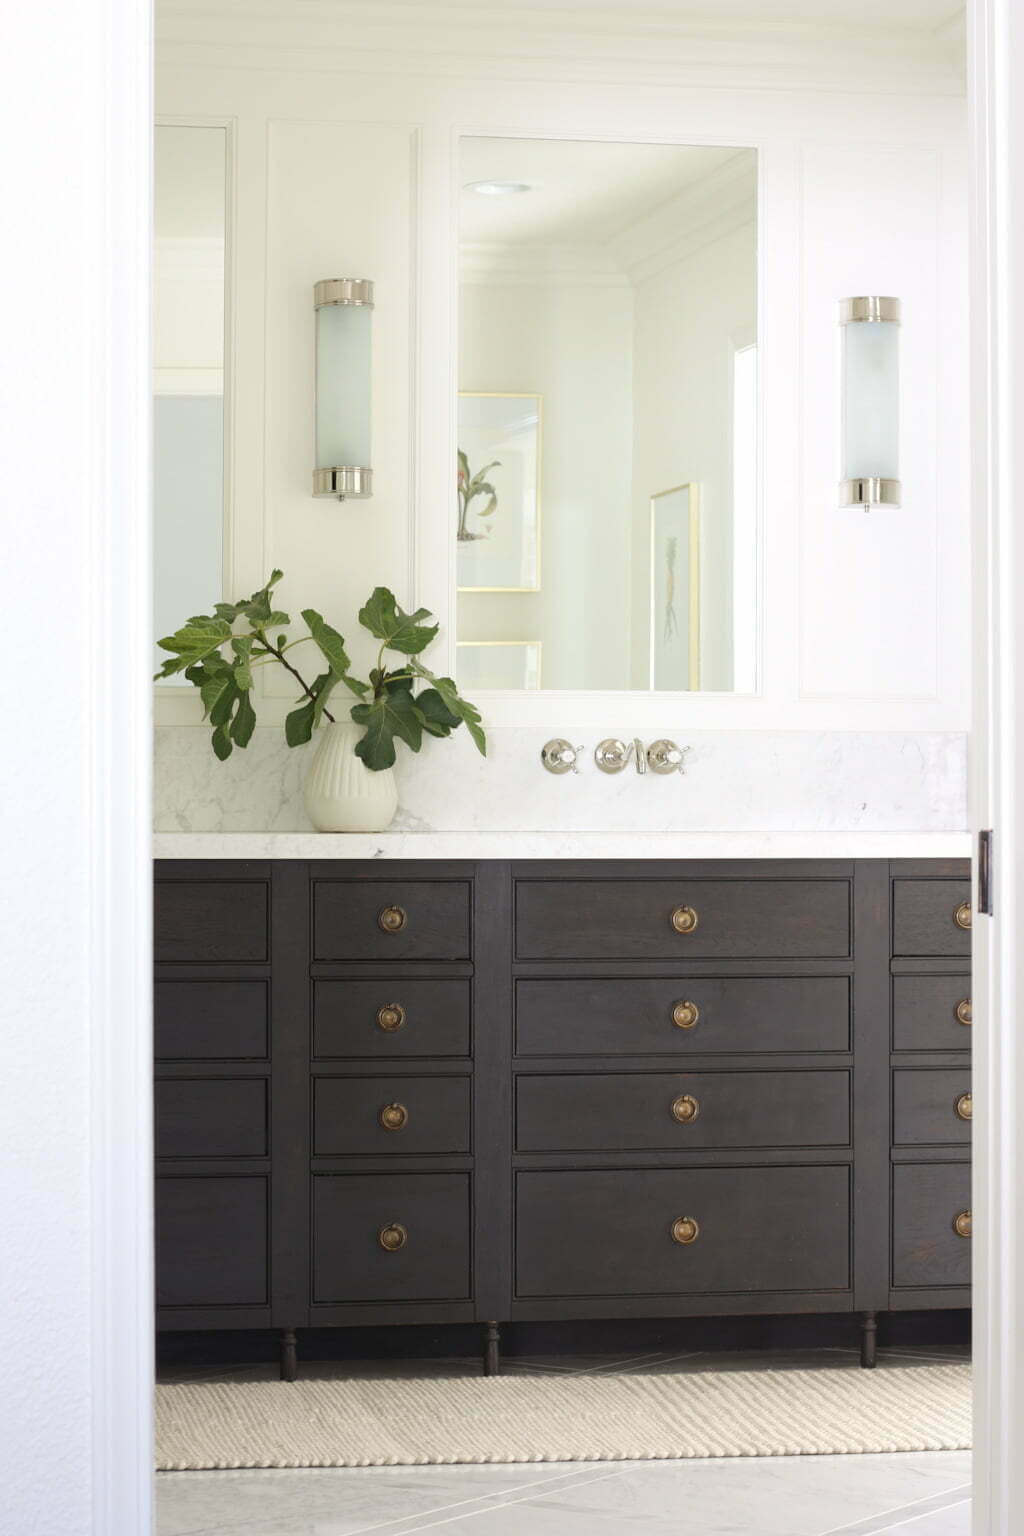 Beautiful, custom made wooden bathroom cabinet with hidden pull out trash.